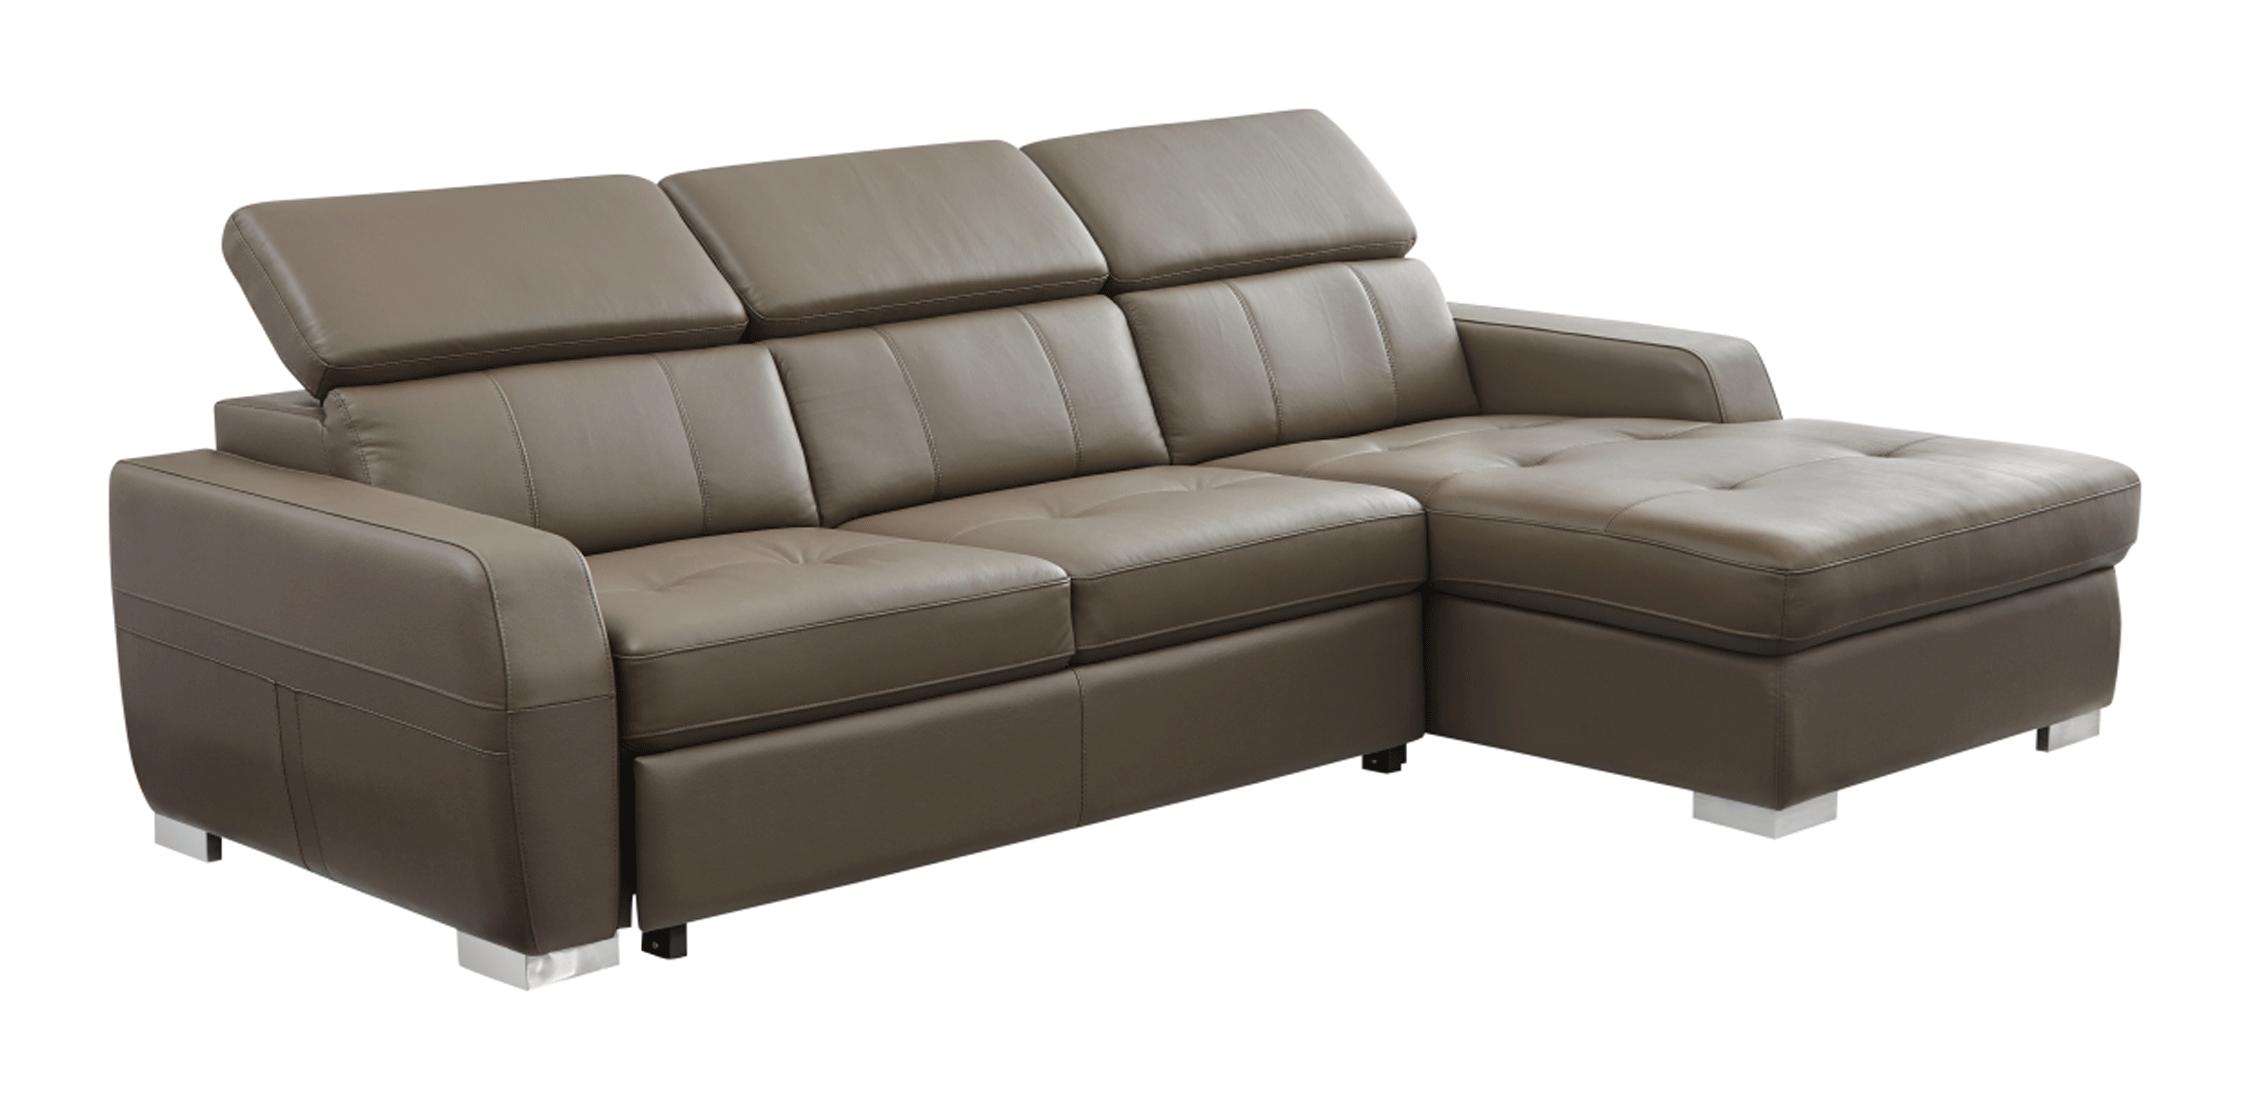 

    
1822SECTIONAL ESF Sectional Sofa Bed
